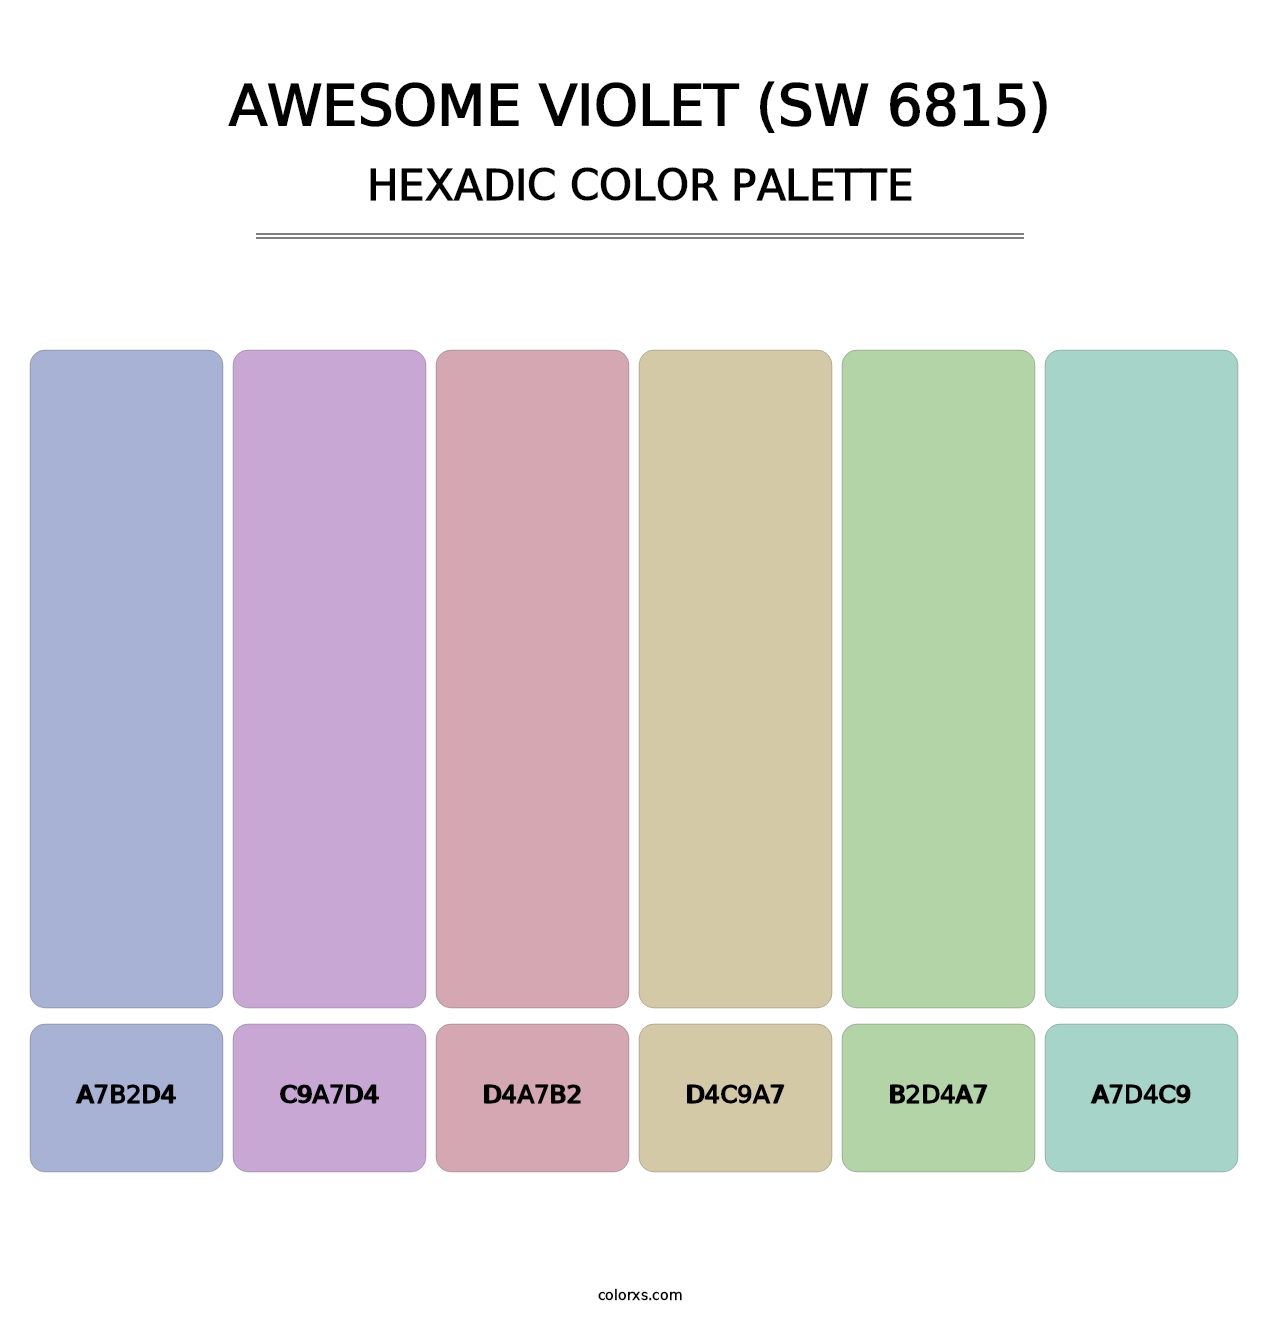 Awesome Violet (SW 6815) - Hexadic Color Palette